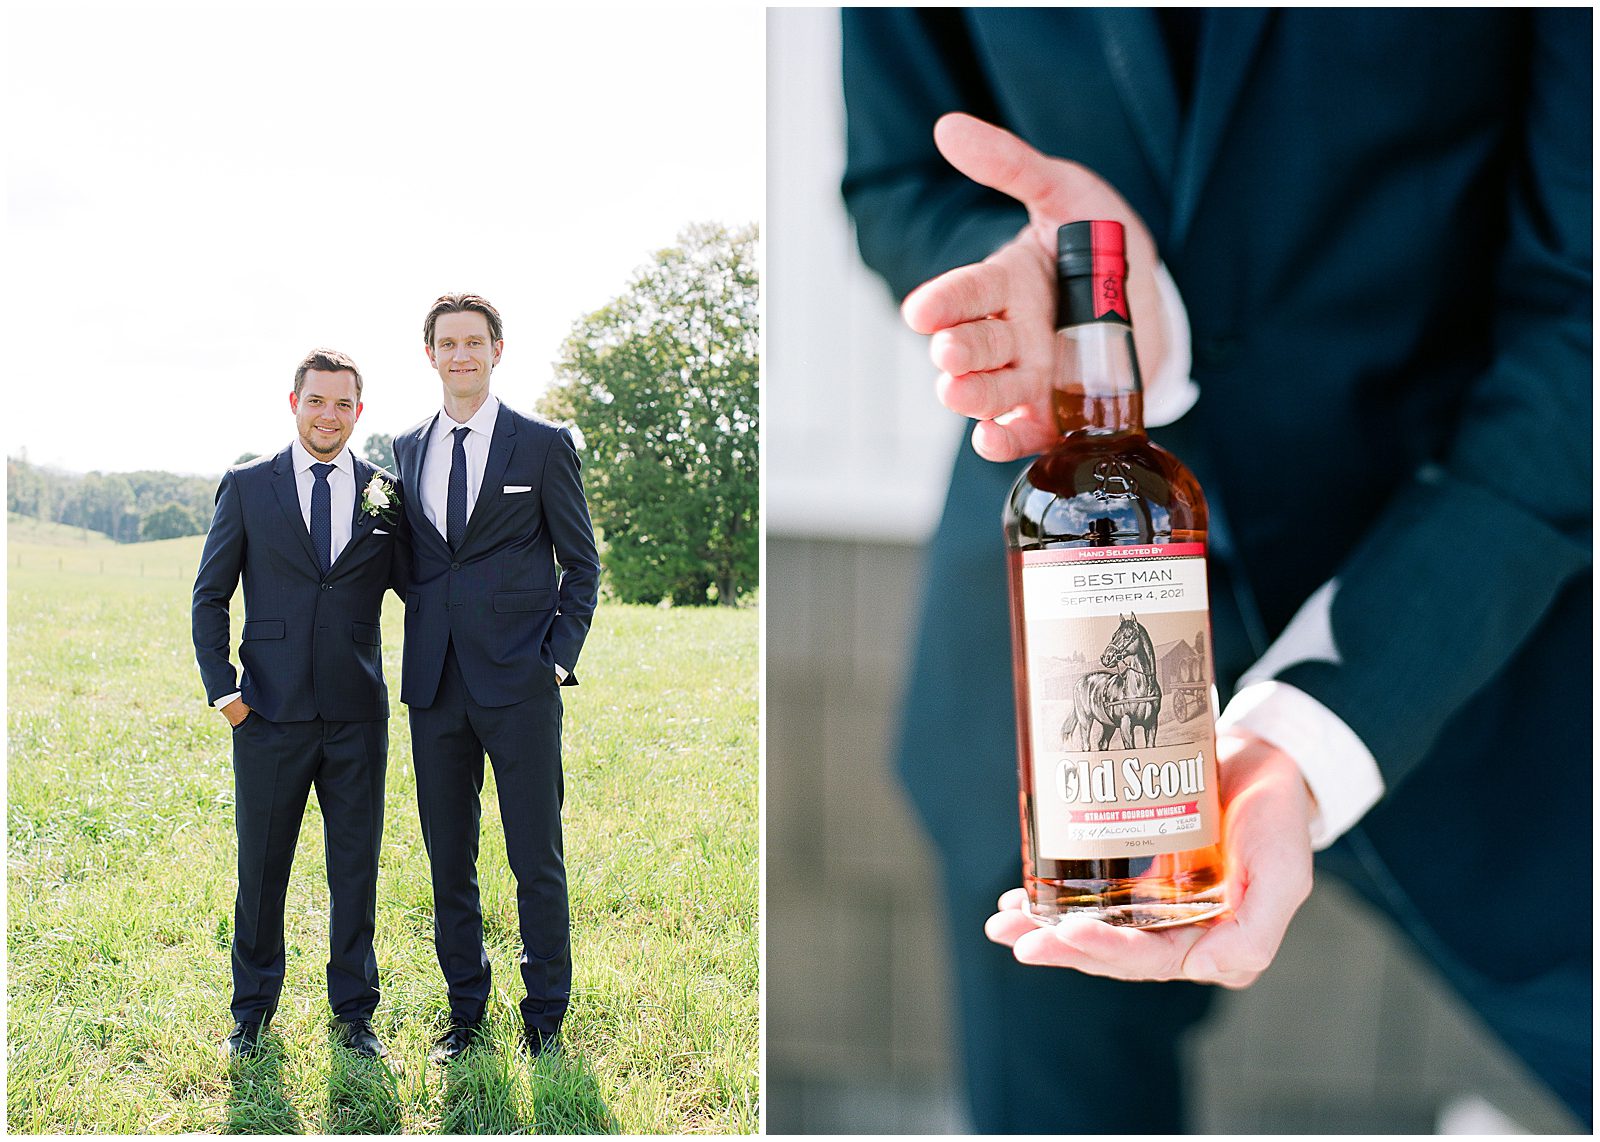 Groom with Best Man and Bottle of Scotch Photos